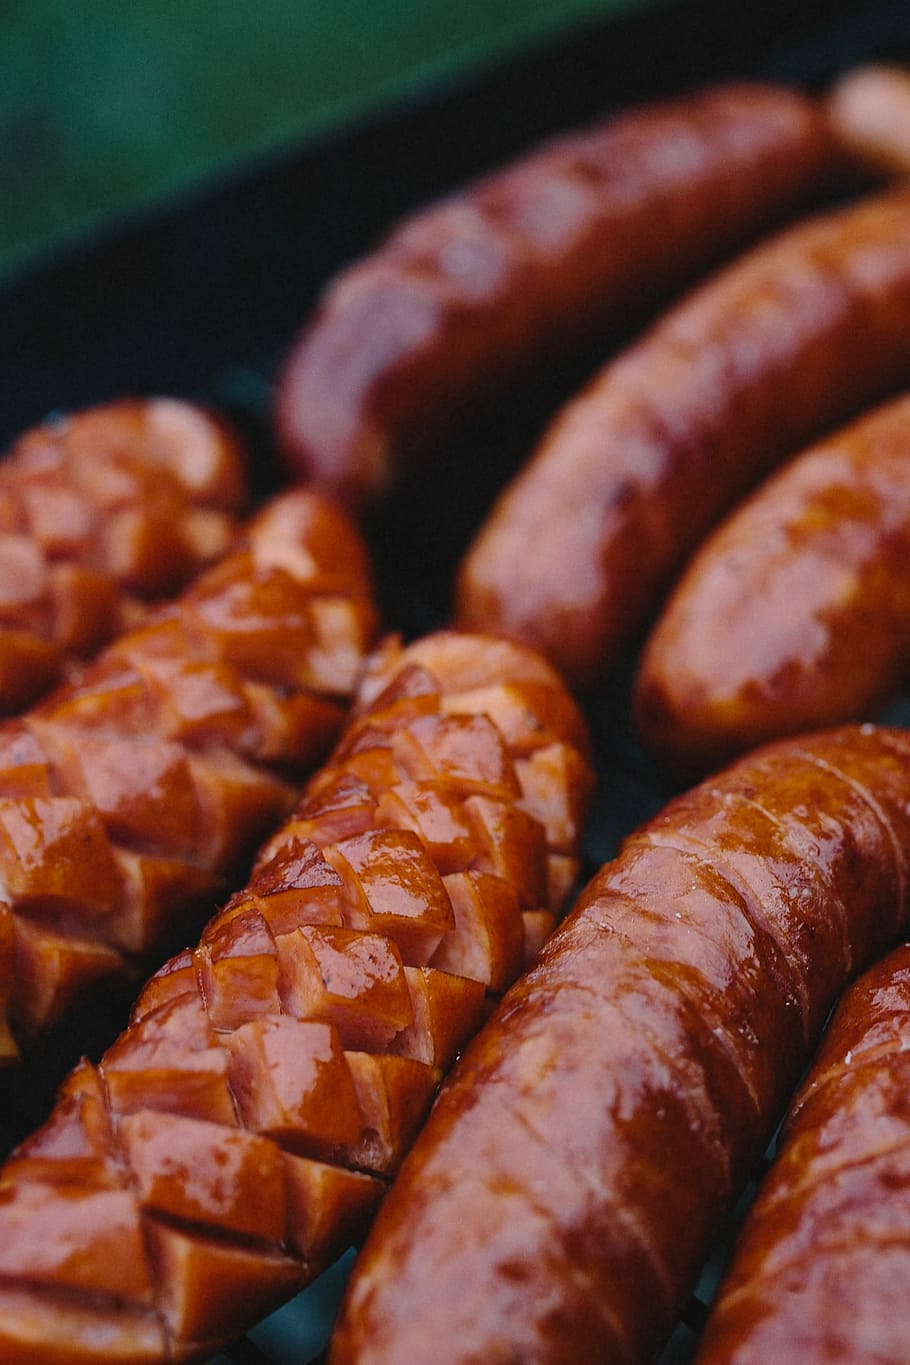 Sausages on the grill, food, kielbasa, barbecue, cook, fire, flame